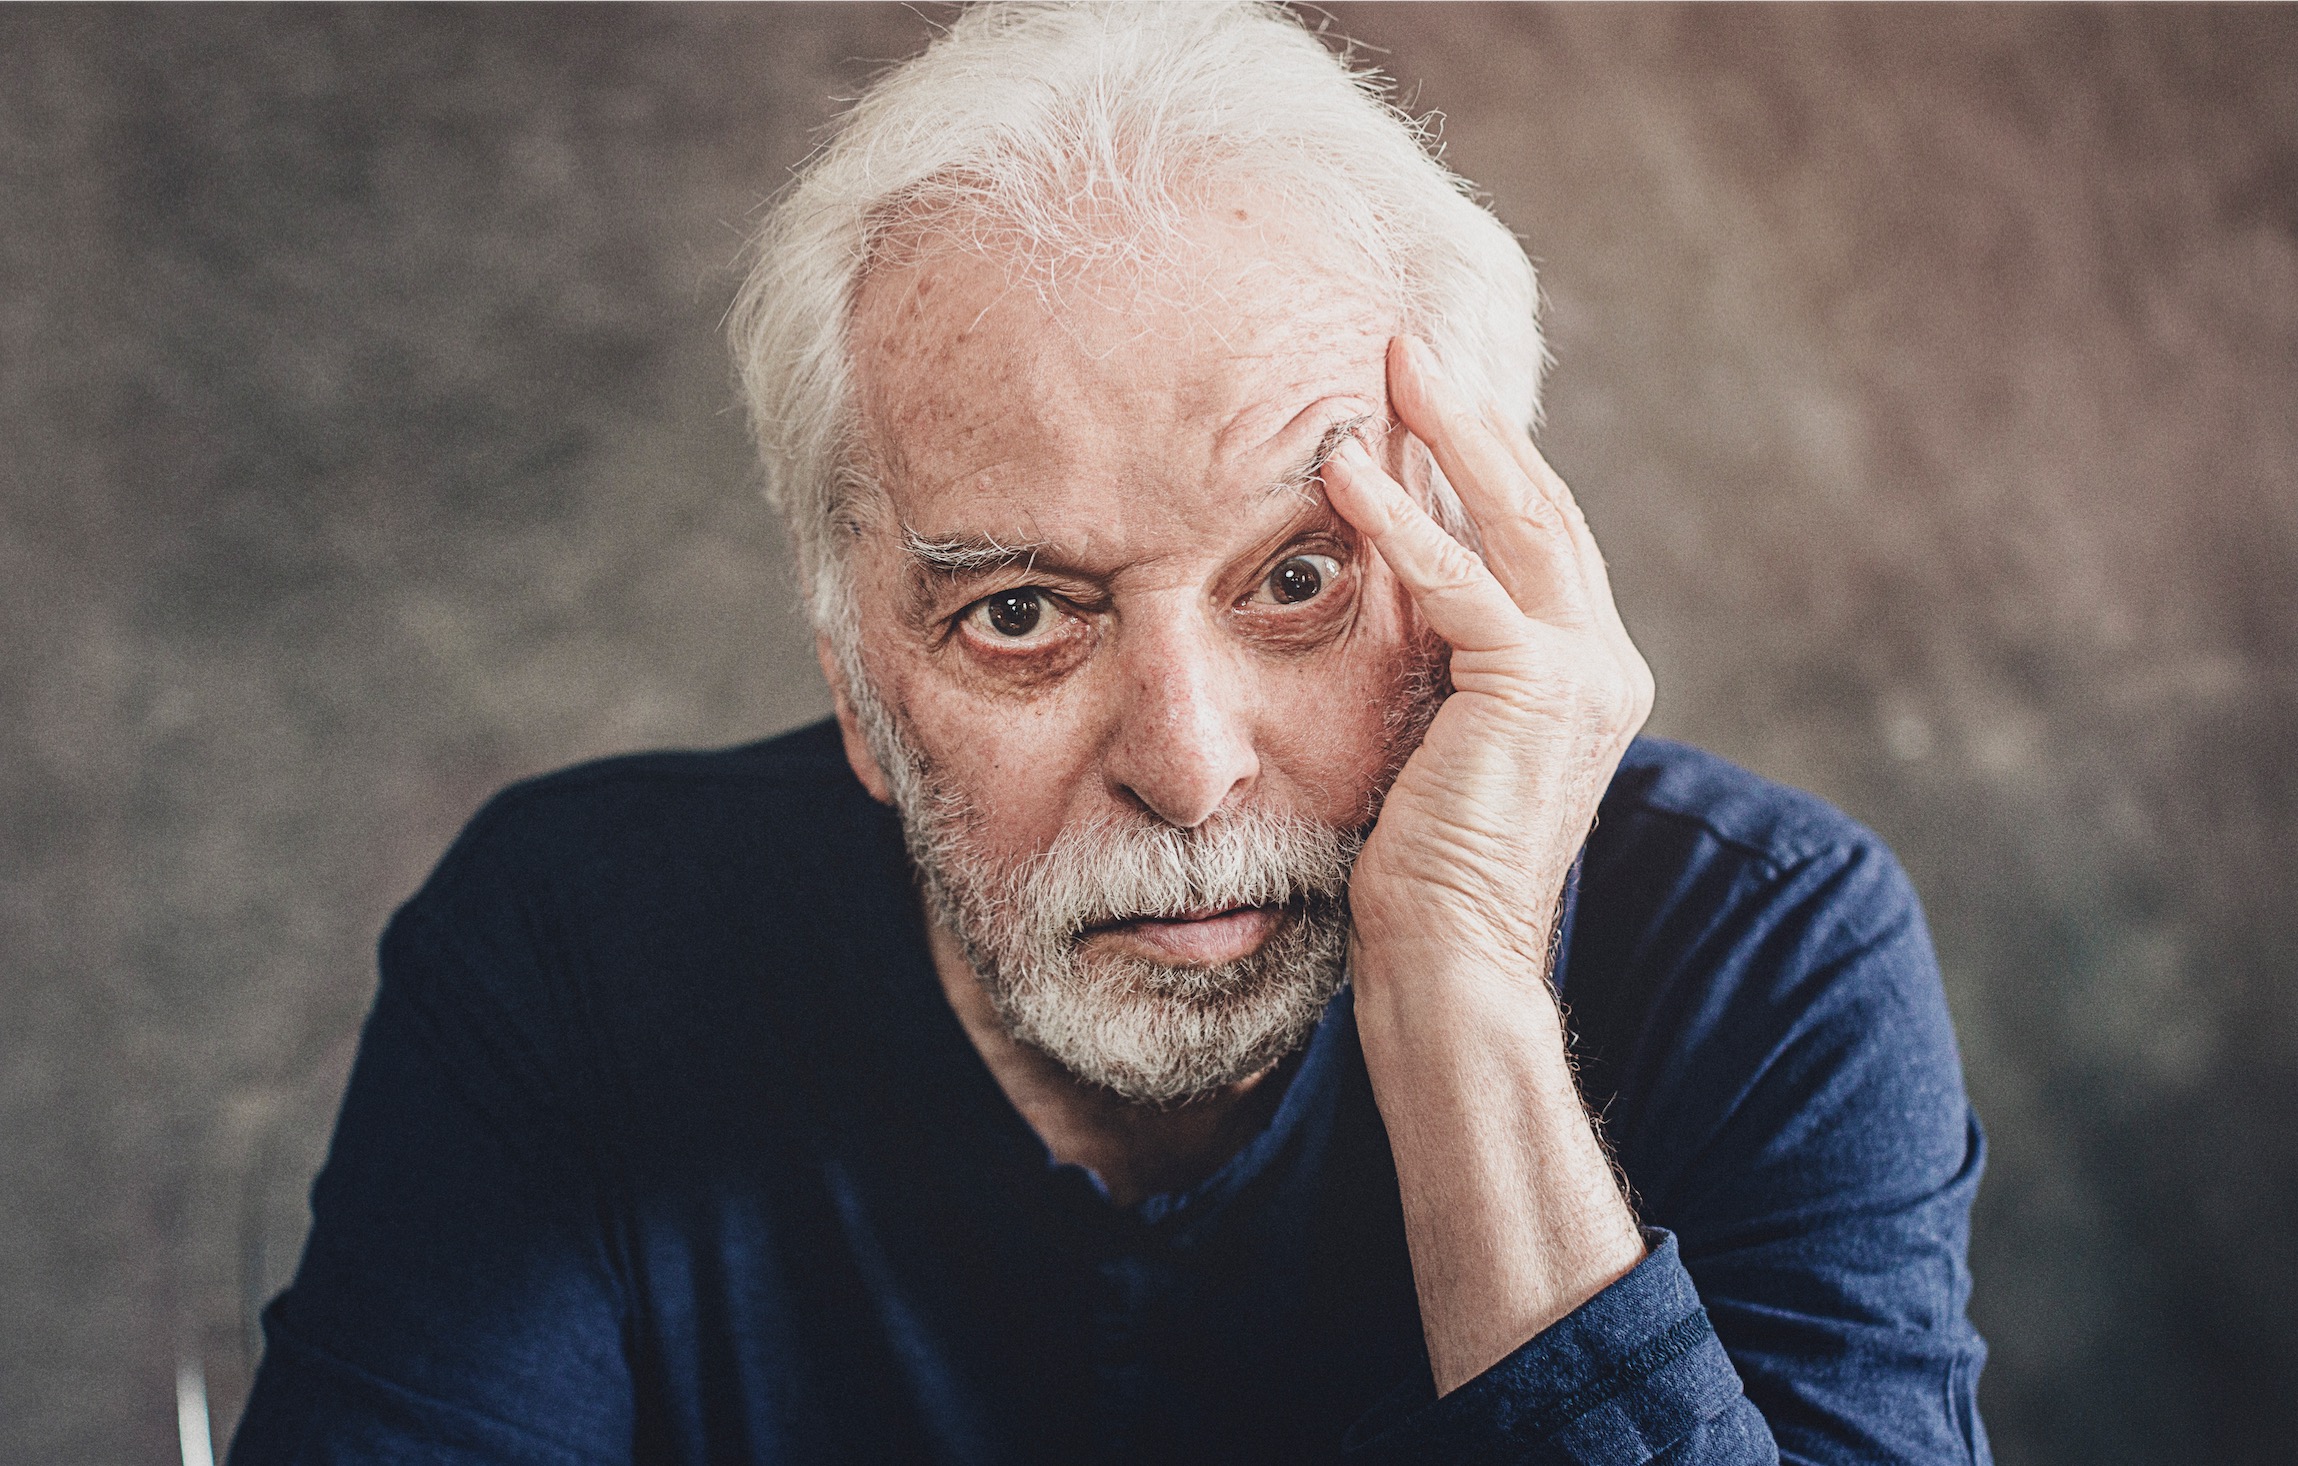 Alejandro Jodorowsky Tells Us How to Heal the World With a Placebo. Den of Geek